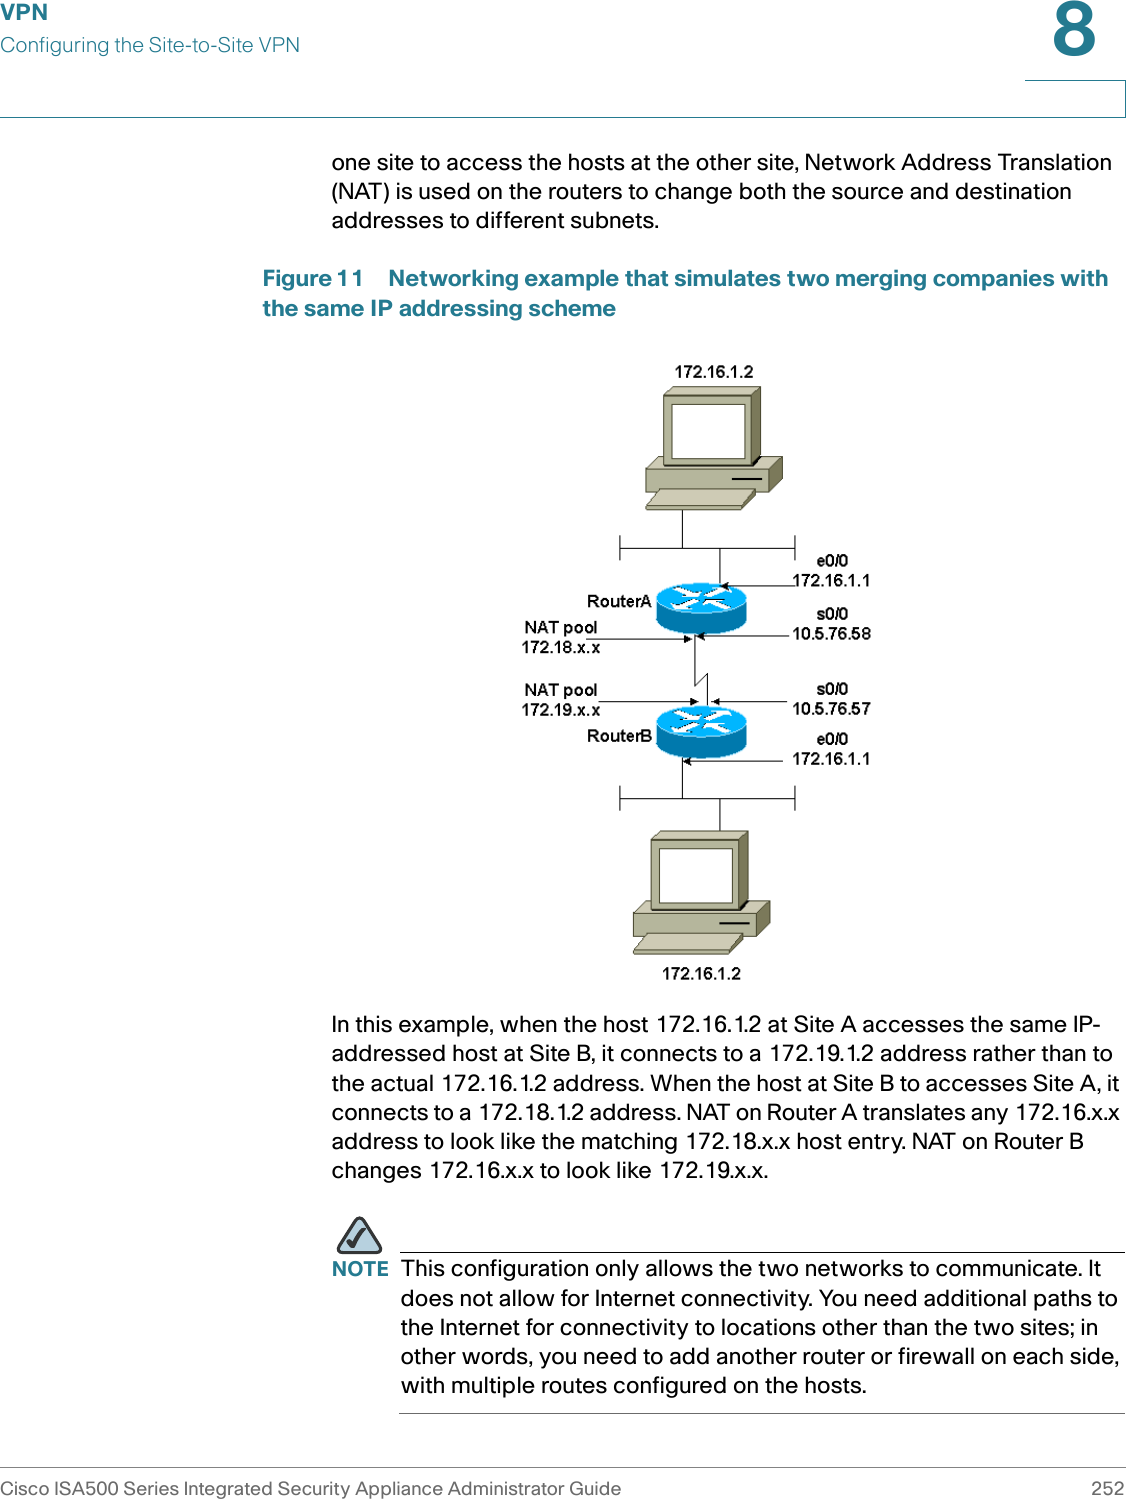 VPNConfiguring the Site-to-Site VPNCisco ISA500 Series Integrated Security Appliance Administrator Guide 2528 one site to access the hosts at the other site, Network Address Translation (NAT) is used on the routers to change both the source and destination addresses to different subnets.Figure 11 Networking example that simulates two merging companies with the same IP addressing schemeIn this example, when the host 172.16.1.2 at Site A accesses the same IP-addressed host at Site B, it connects to a 172.19.1.2 address rather than to the actual 172.16.1.2 address. When the host at Site B to accesses Site A, it connects to a 172.18.1.2 address. NAT on Router A translates any 172.16.x.x address to look like the matching 172.18.x.x host entry. NAT on Router B changes 172.16.x.x to look like 172.19.x.x.NOTE This configuration only allows the two networks to communicate. It does not allow for Internet connectivity. You need additional paths to the Internet for connectivity to locations other than the two sites; in other words, you need to add another router or firewall on each side, with multiple routes configured on the hosts.